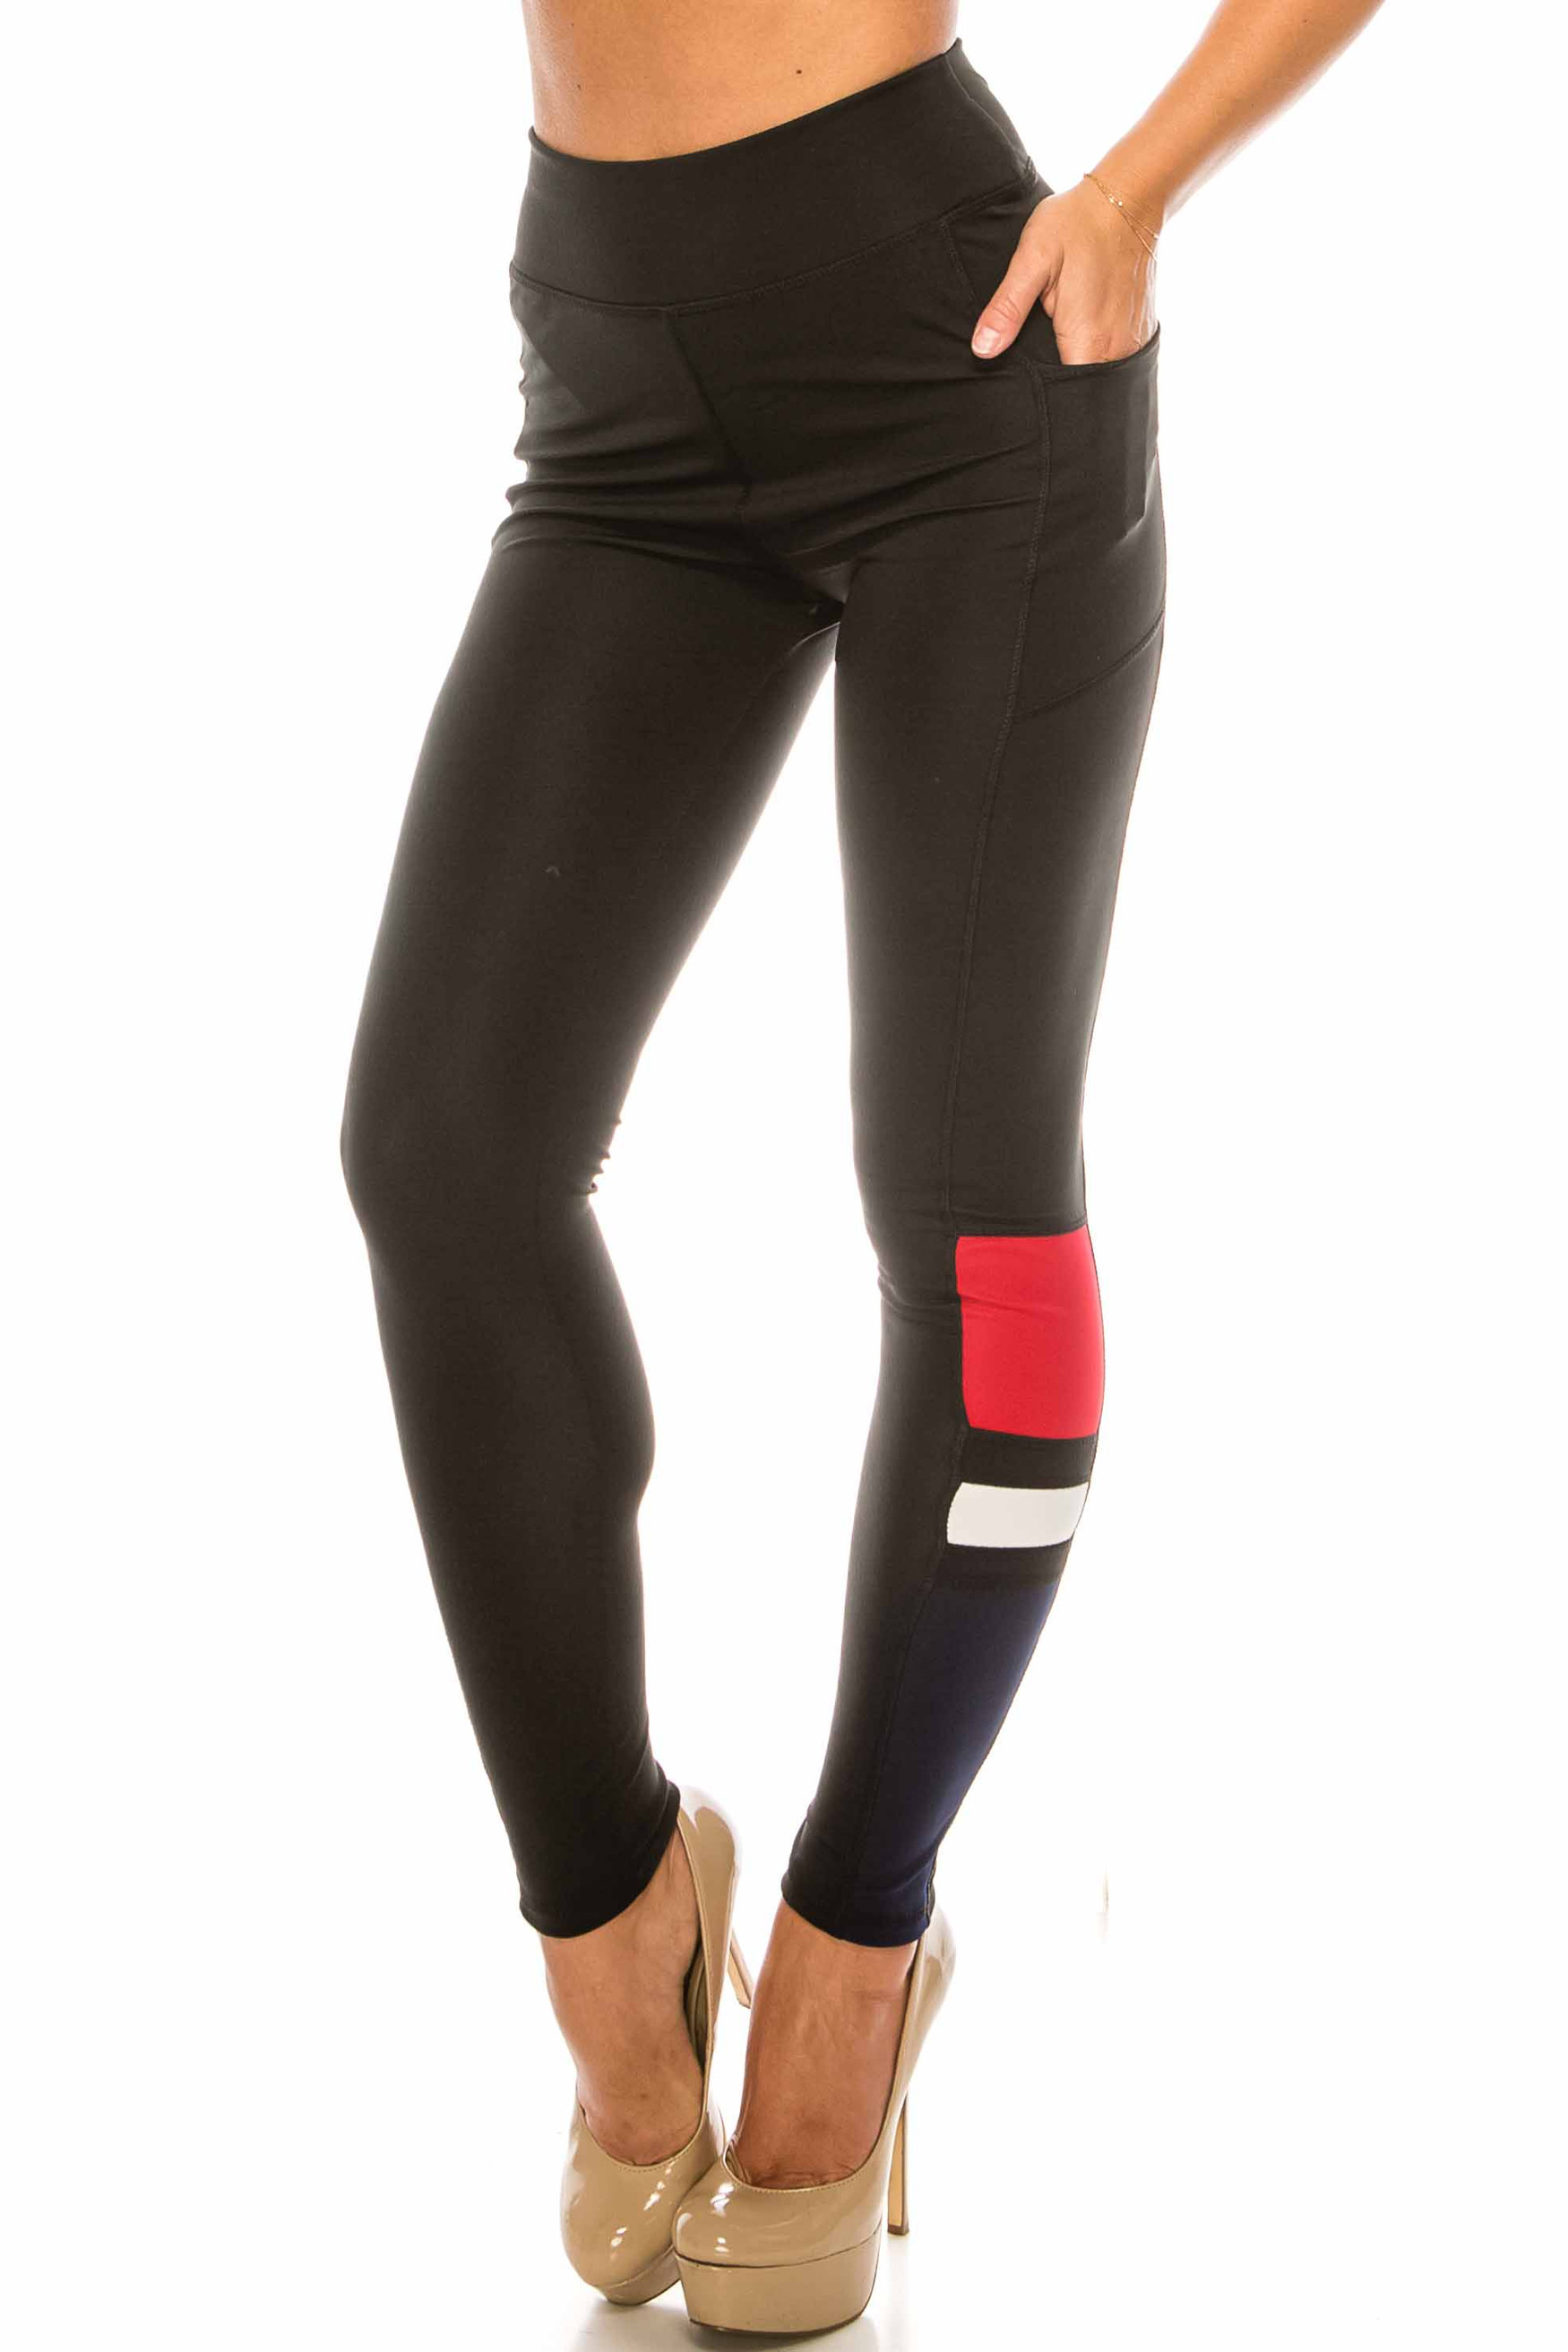 Red Accent High Waisted Workout Leggings with Side Pocket